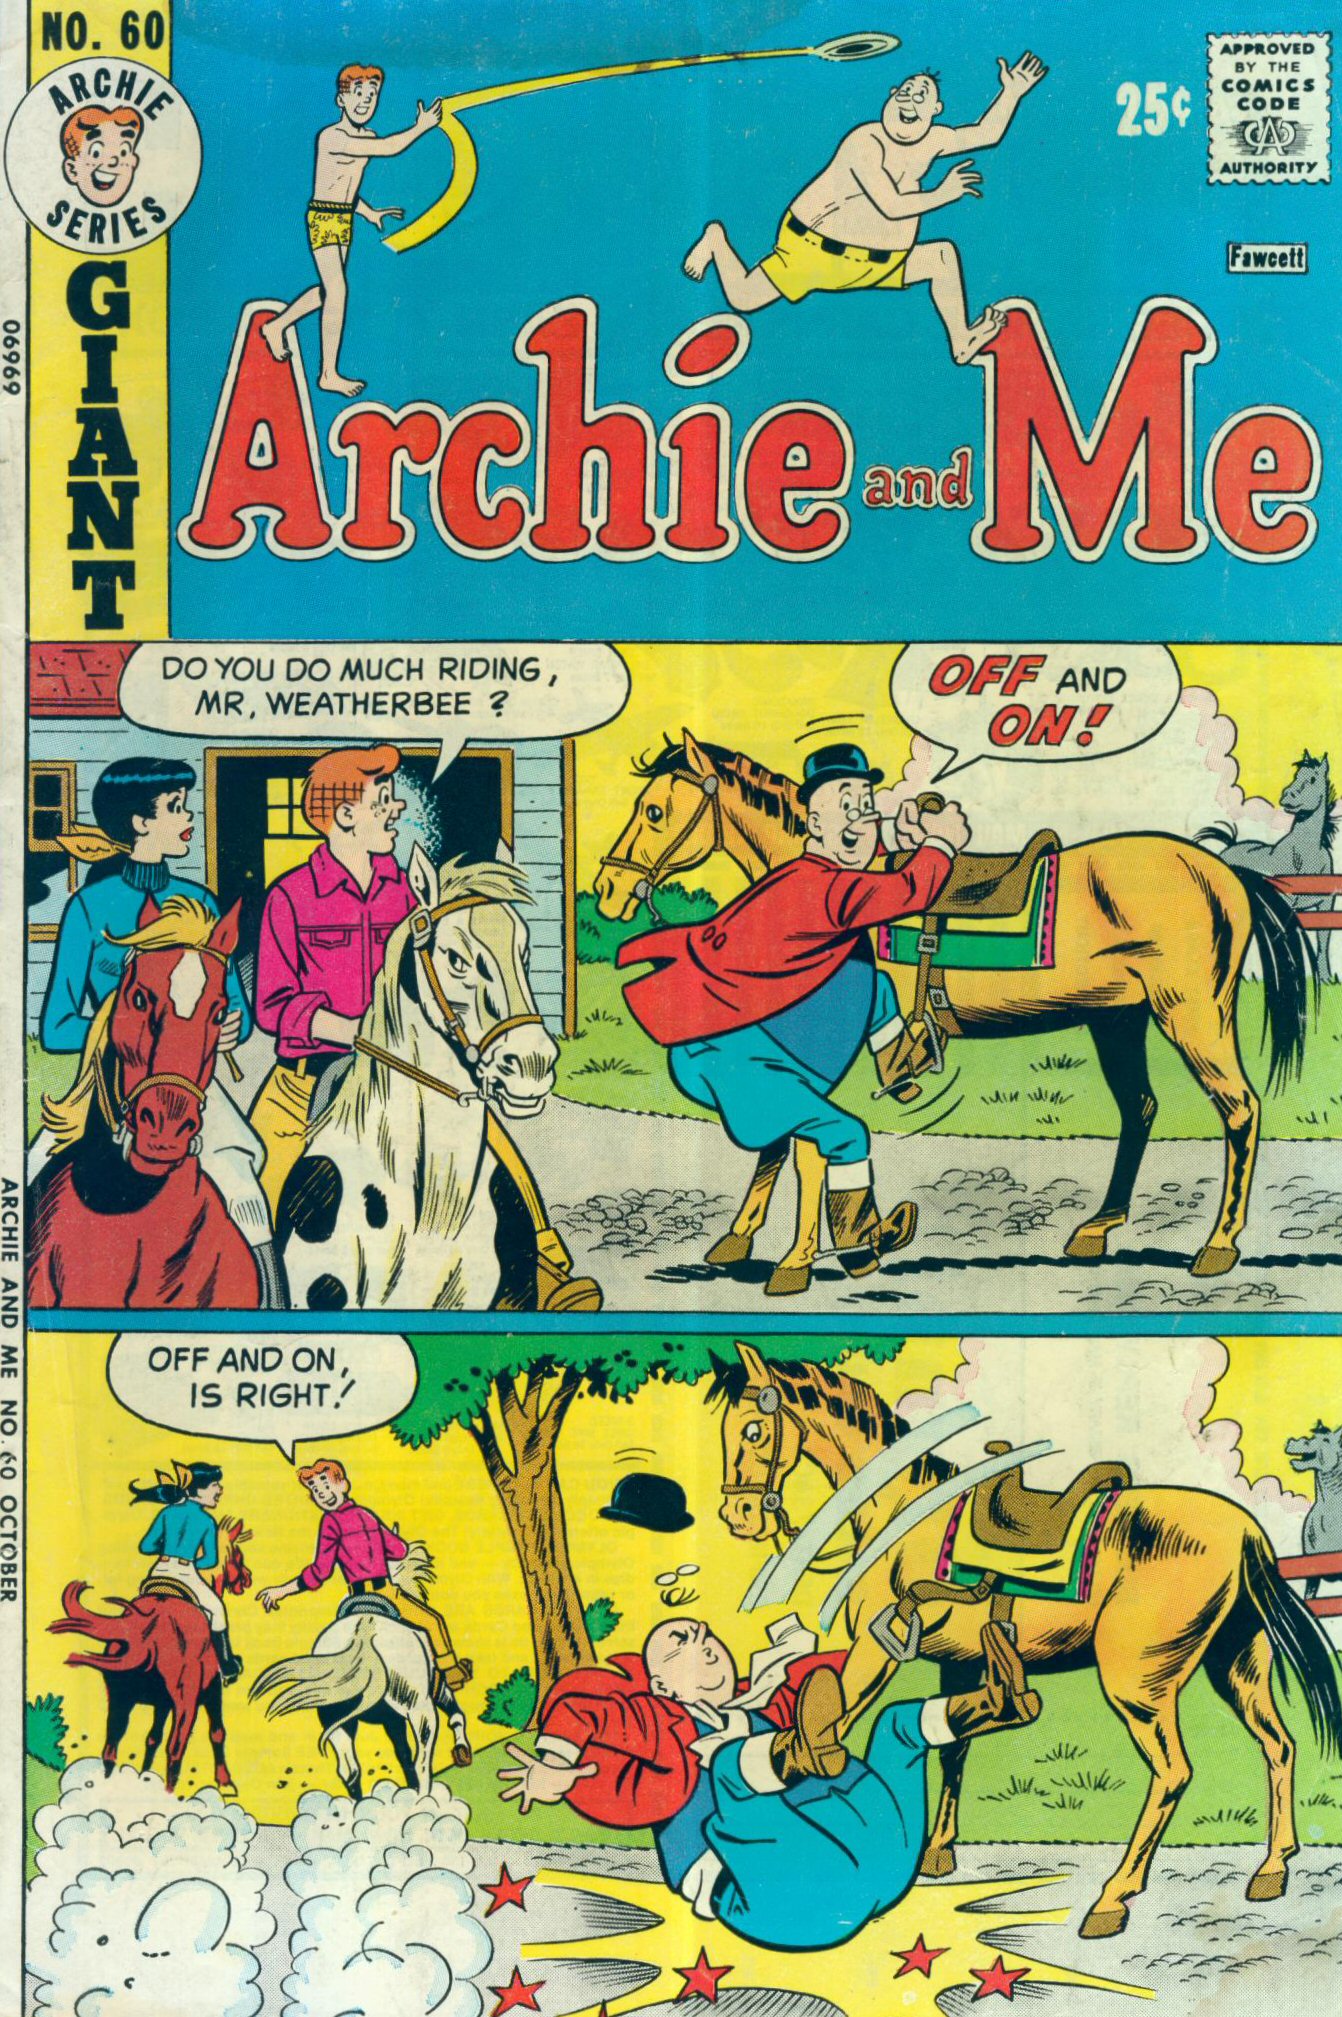 Read online Archie and Me comic -  Issue #60 - 1